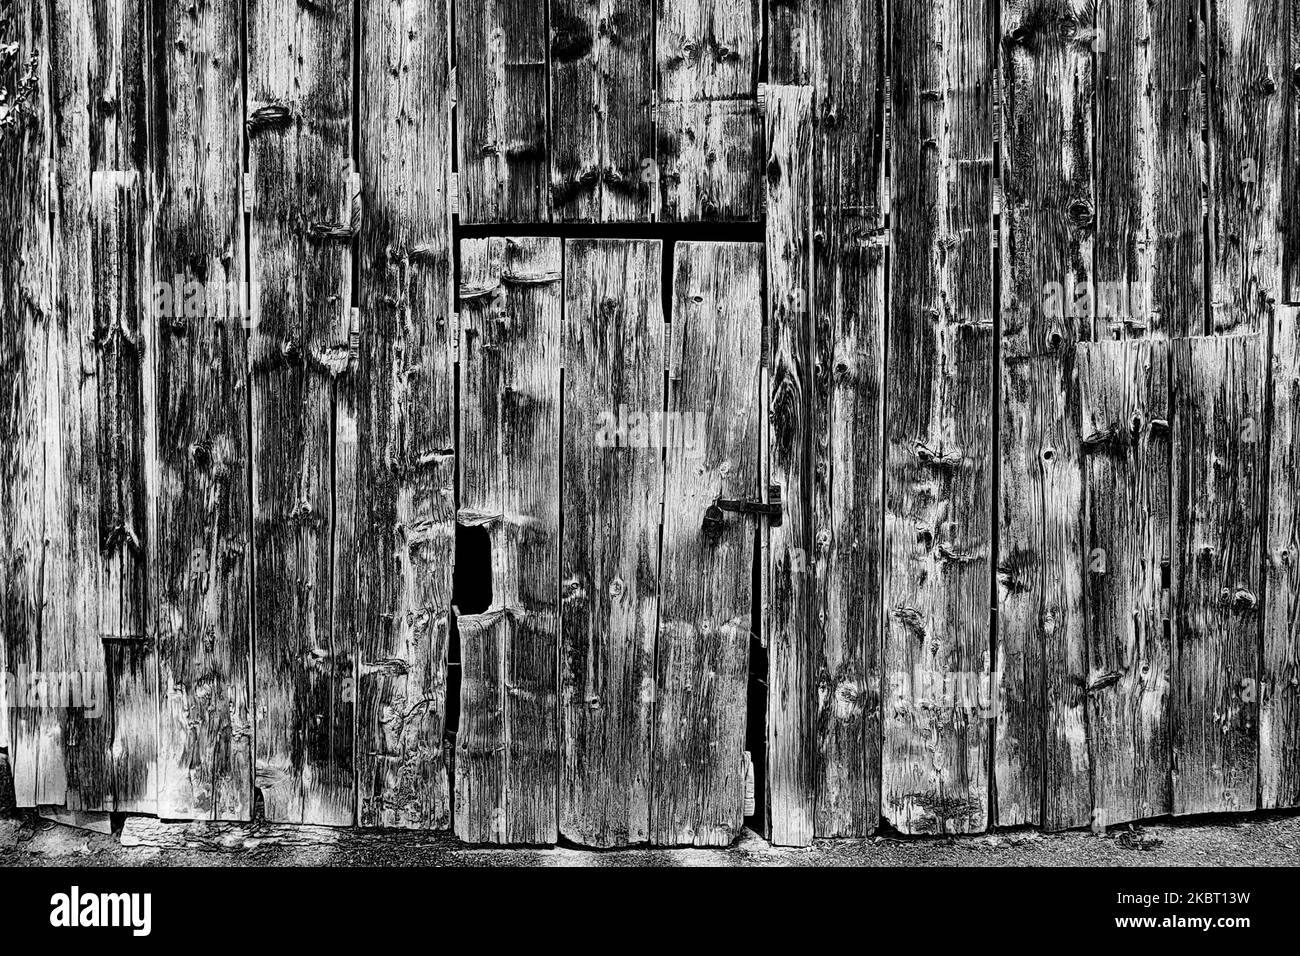 Invisible old wooden door black and white photo Stock Photo